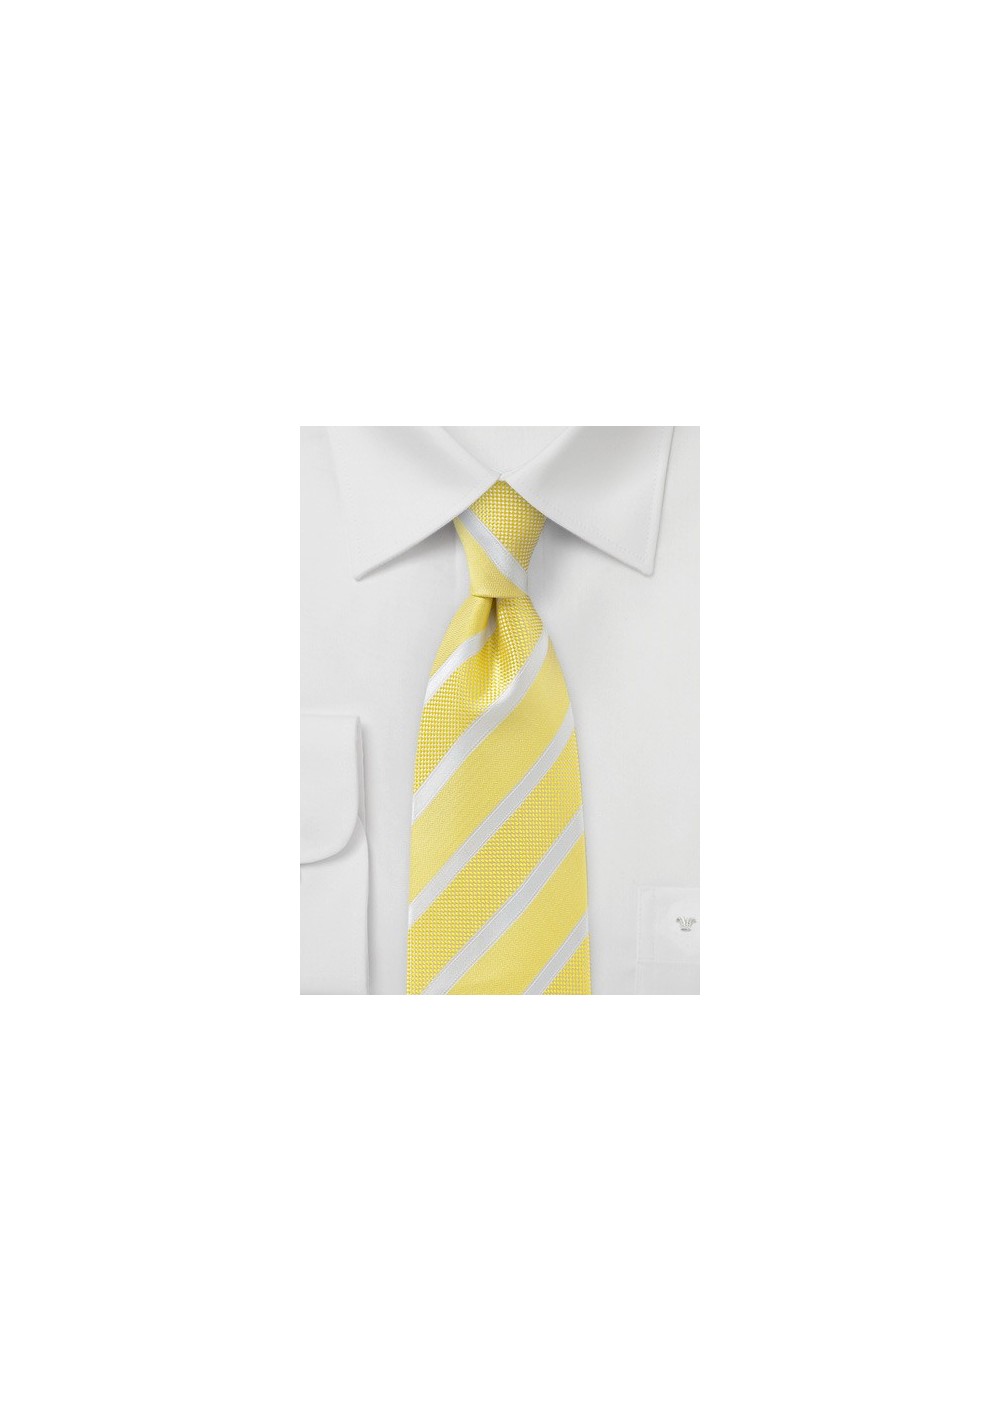 Striped and Textured Tie in Yellow and White